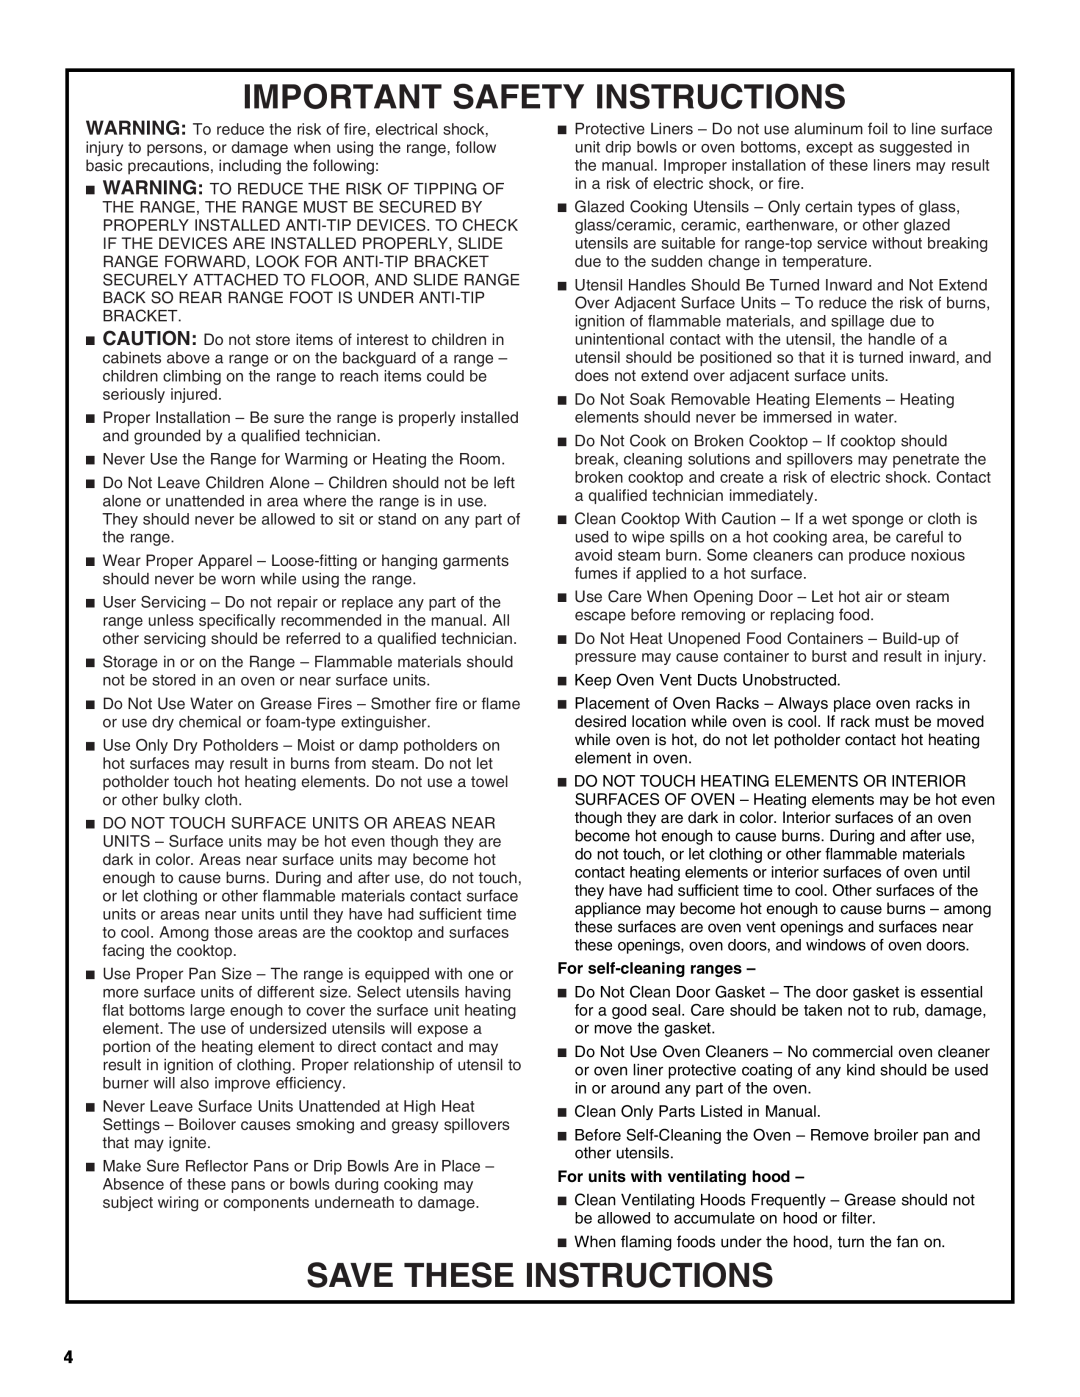 Whirlpool TES325MQ2 manual Important Safety Instructions, Save These Instructions, For self-cleaning ranges 